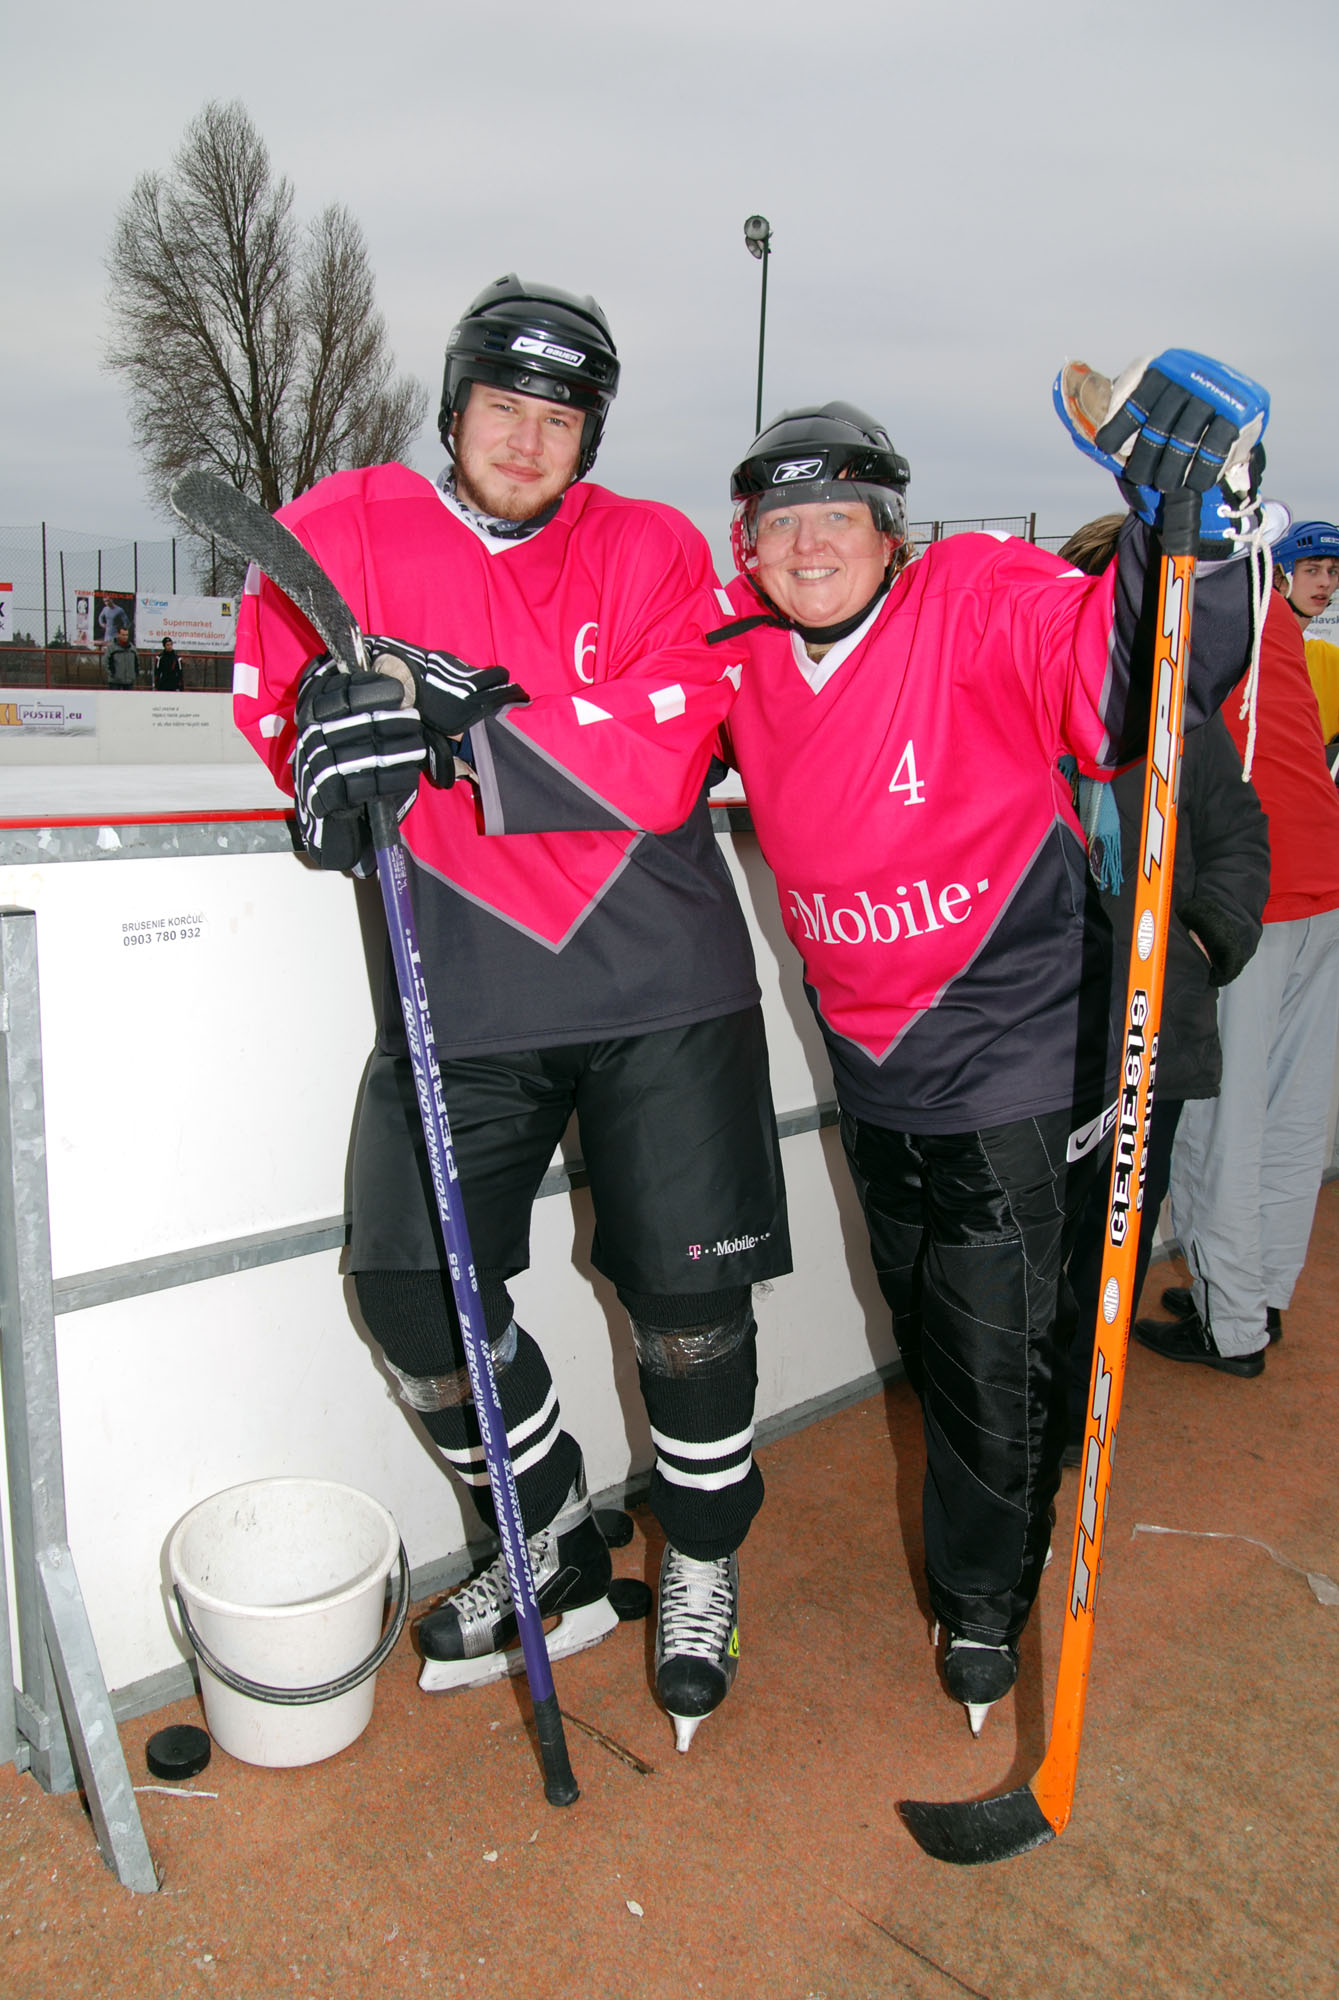 two people standing together next to each other wearing skiis and holding poles